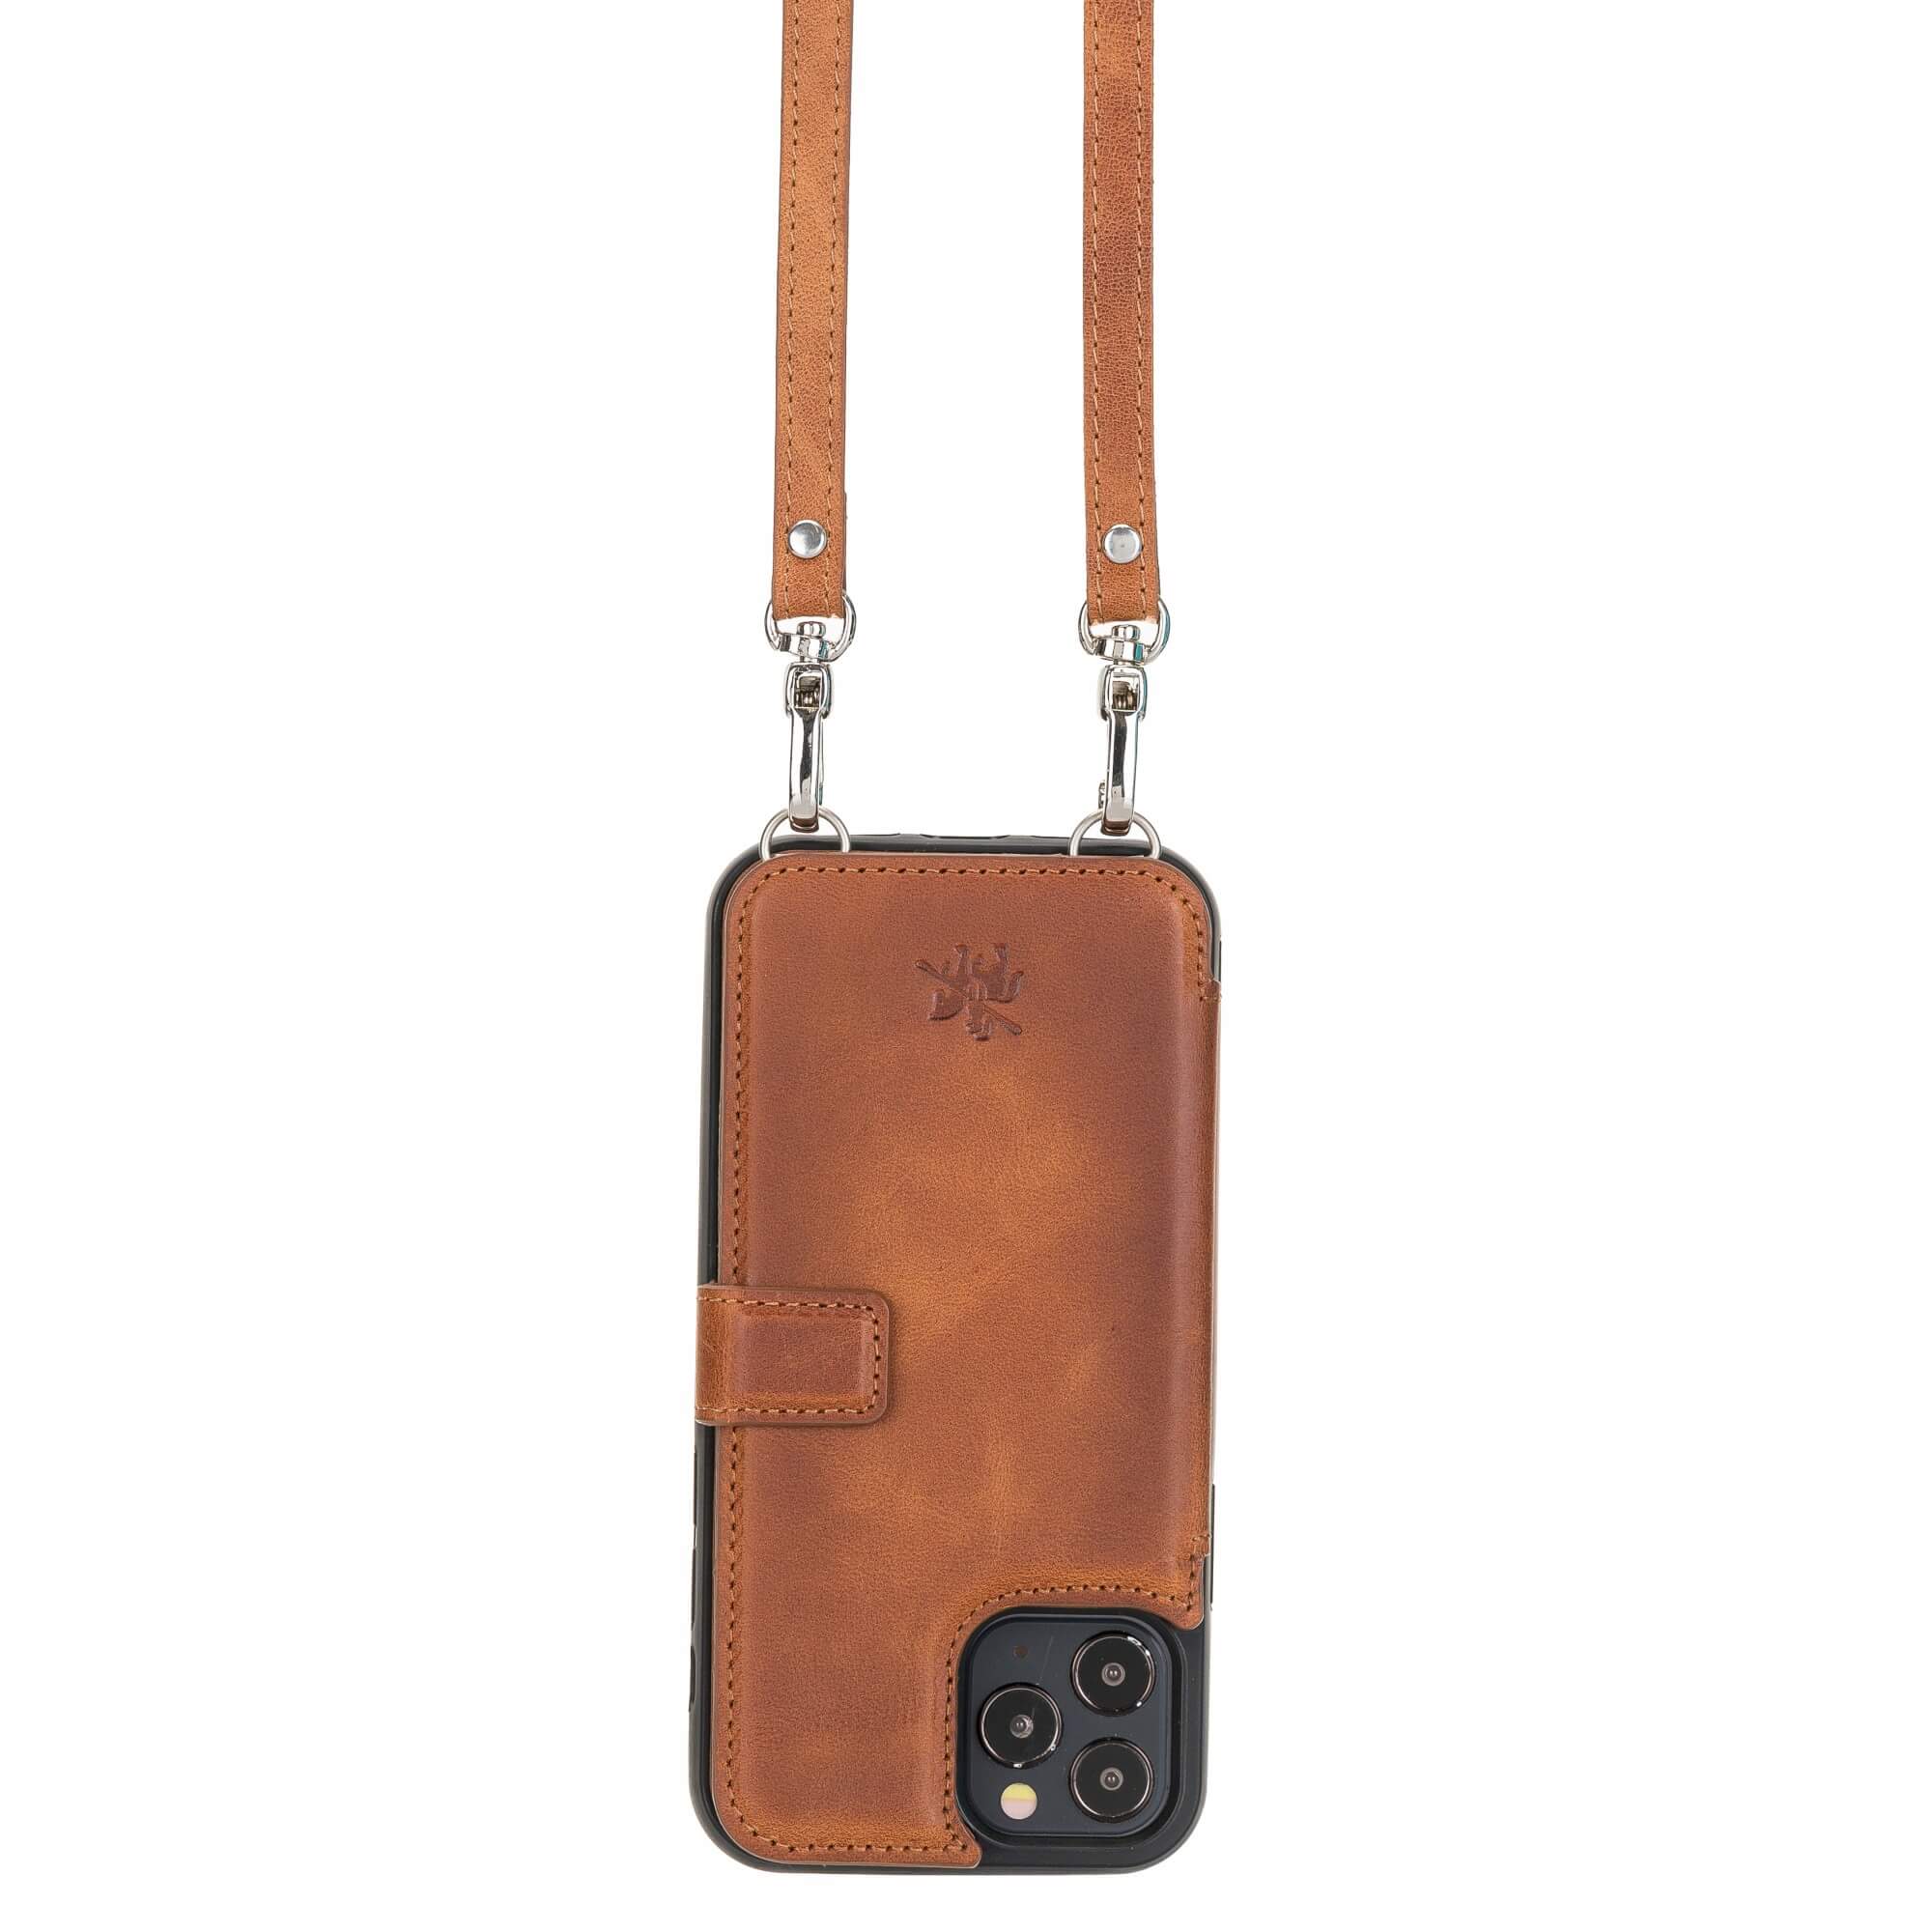 Leather Phone Pouch Leather Crossbody Phone Case Adjustable 